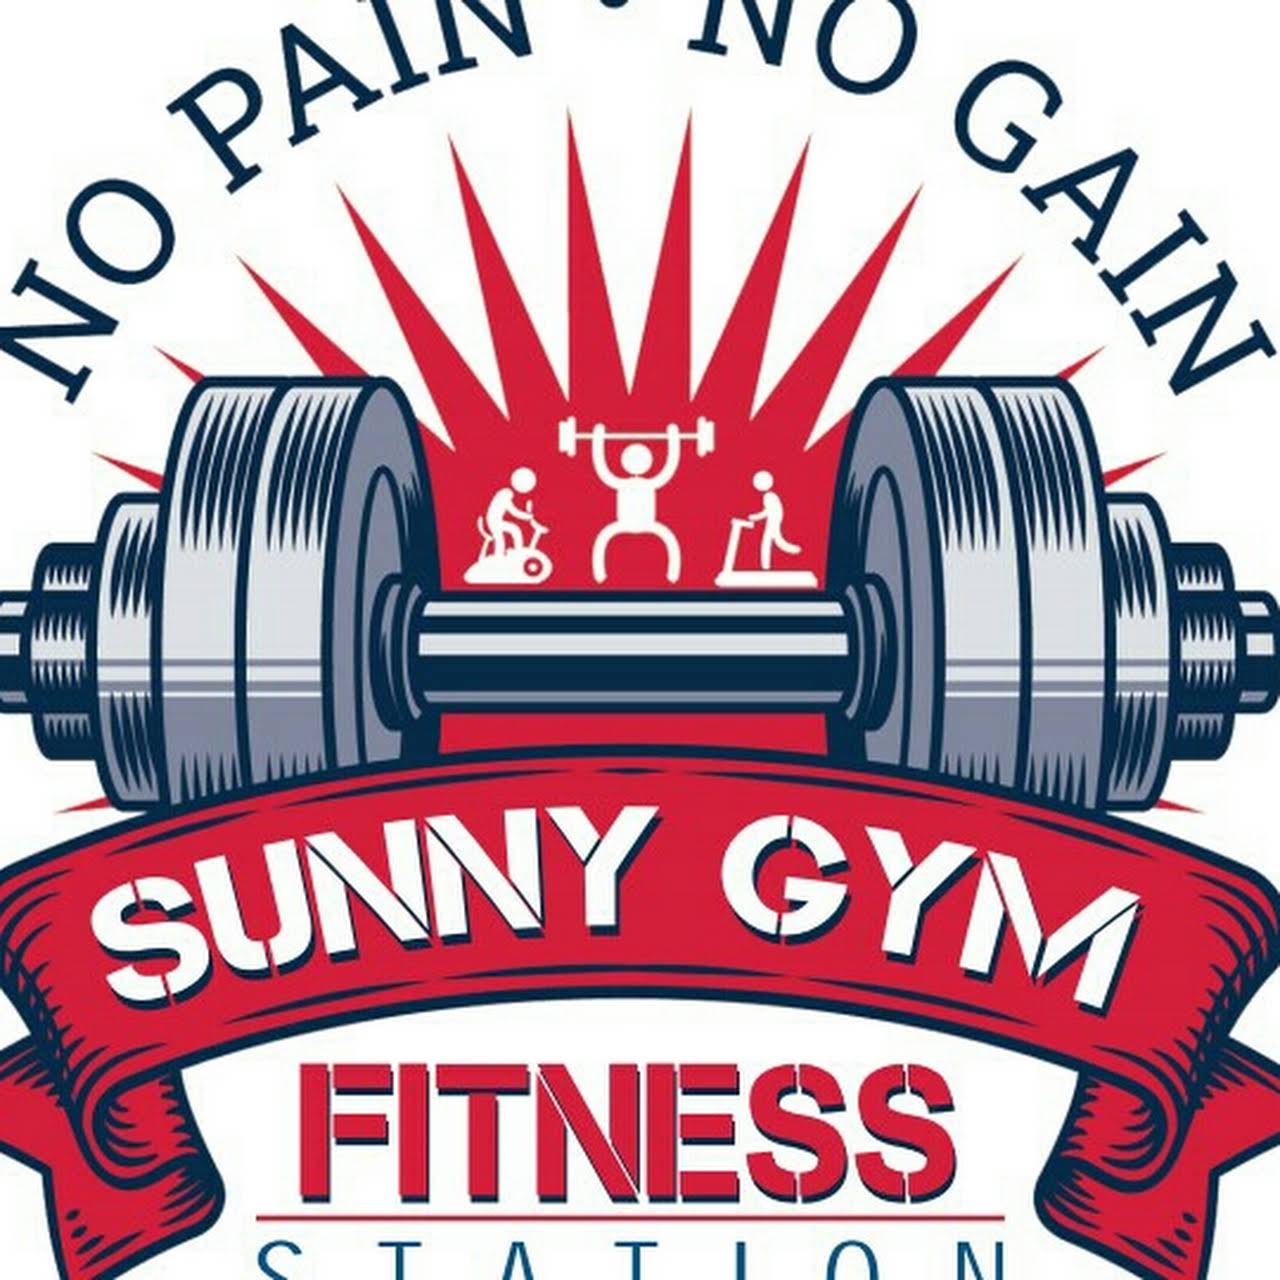 SUNNY GYM FITNESS STATION|Gym and Fitness Centre|Active Life